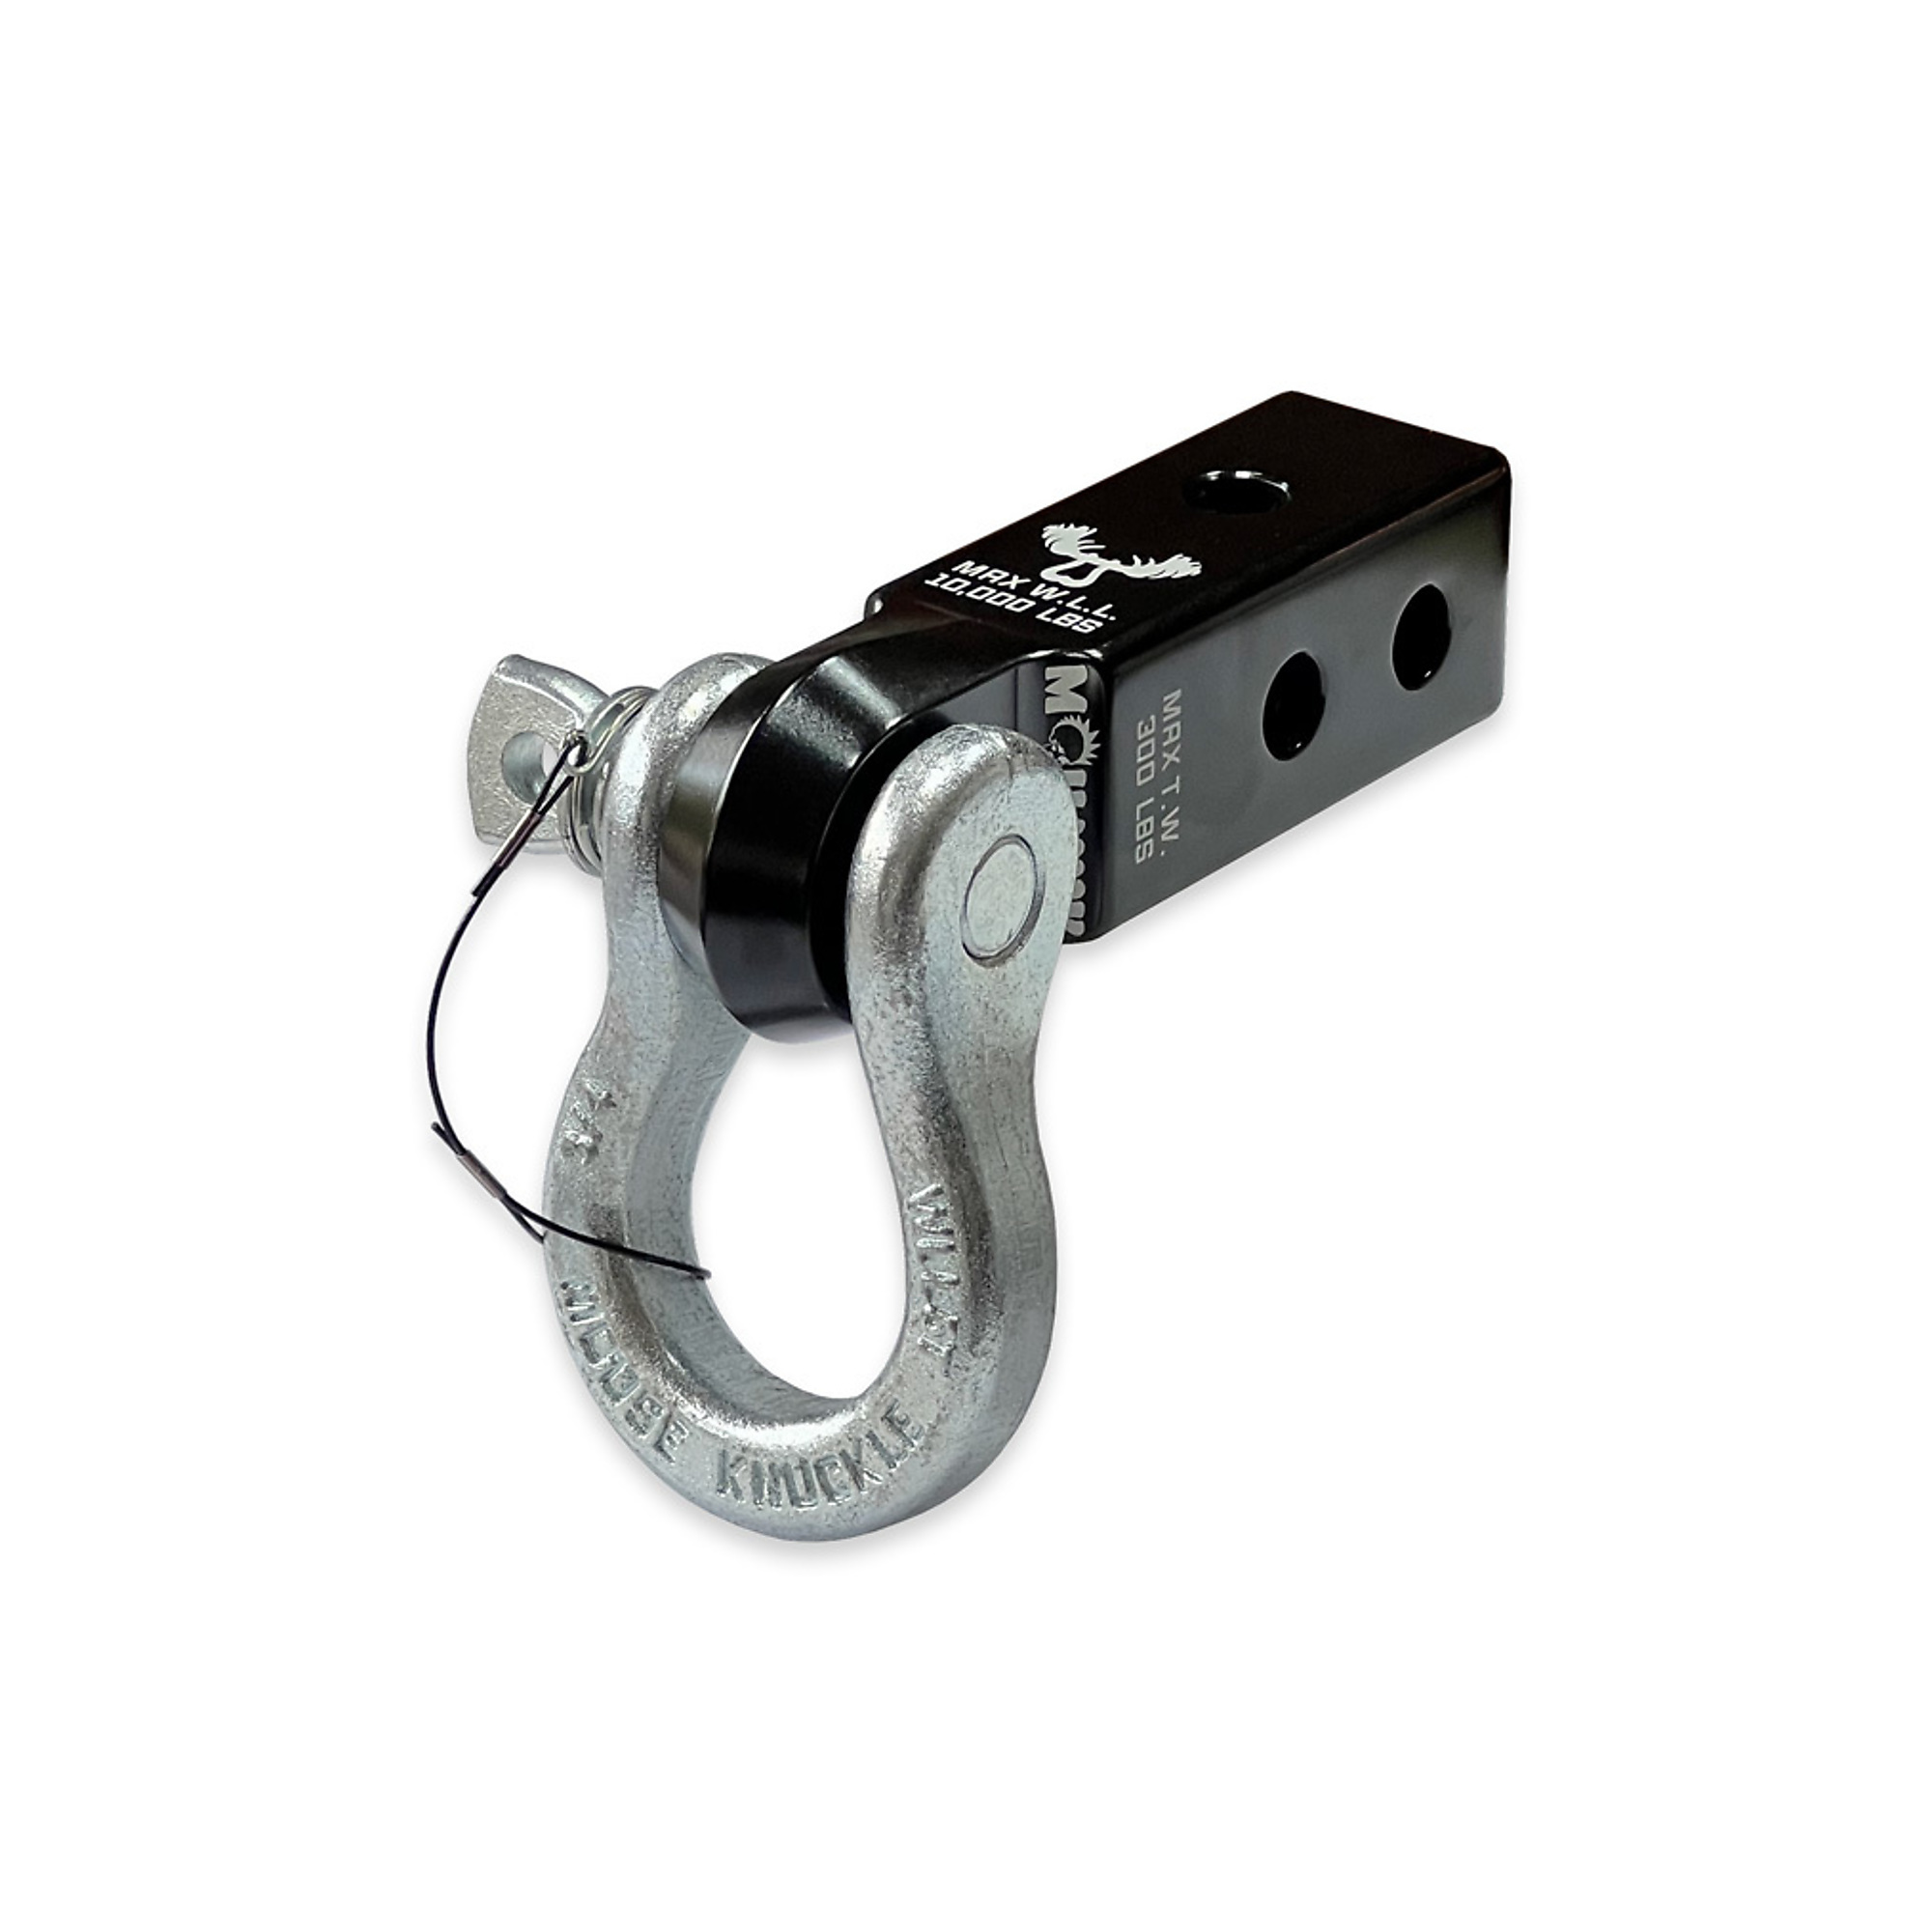 D-Ring/Shackle Mount 2 X 1 With 7/8 Hole, for use with 3/4 pin